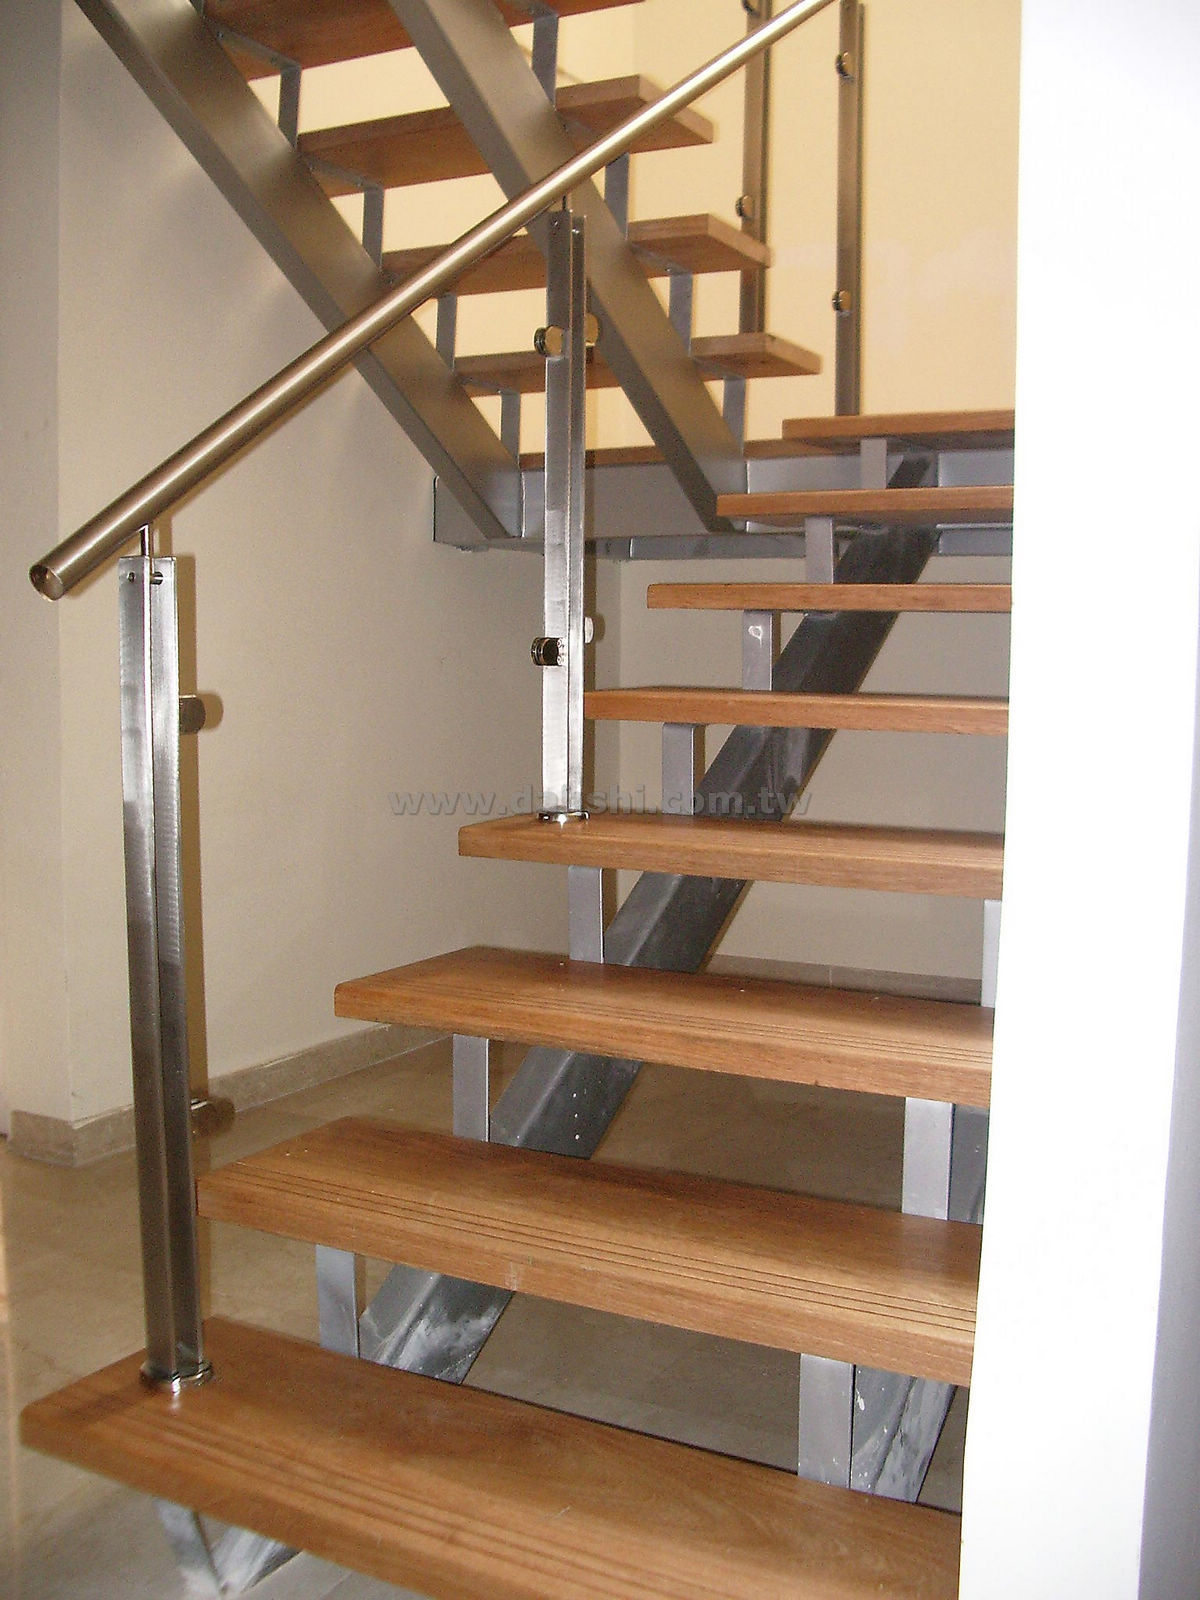 Handrail and Balusters Story for Luis Roldan